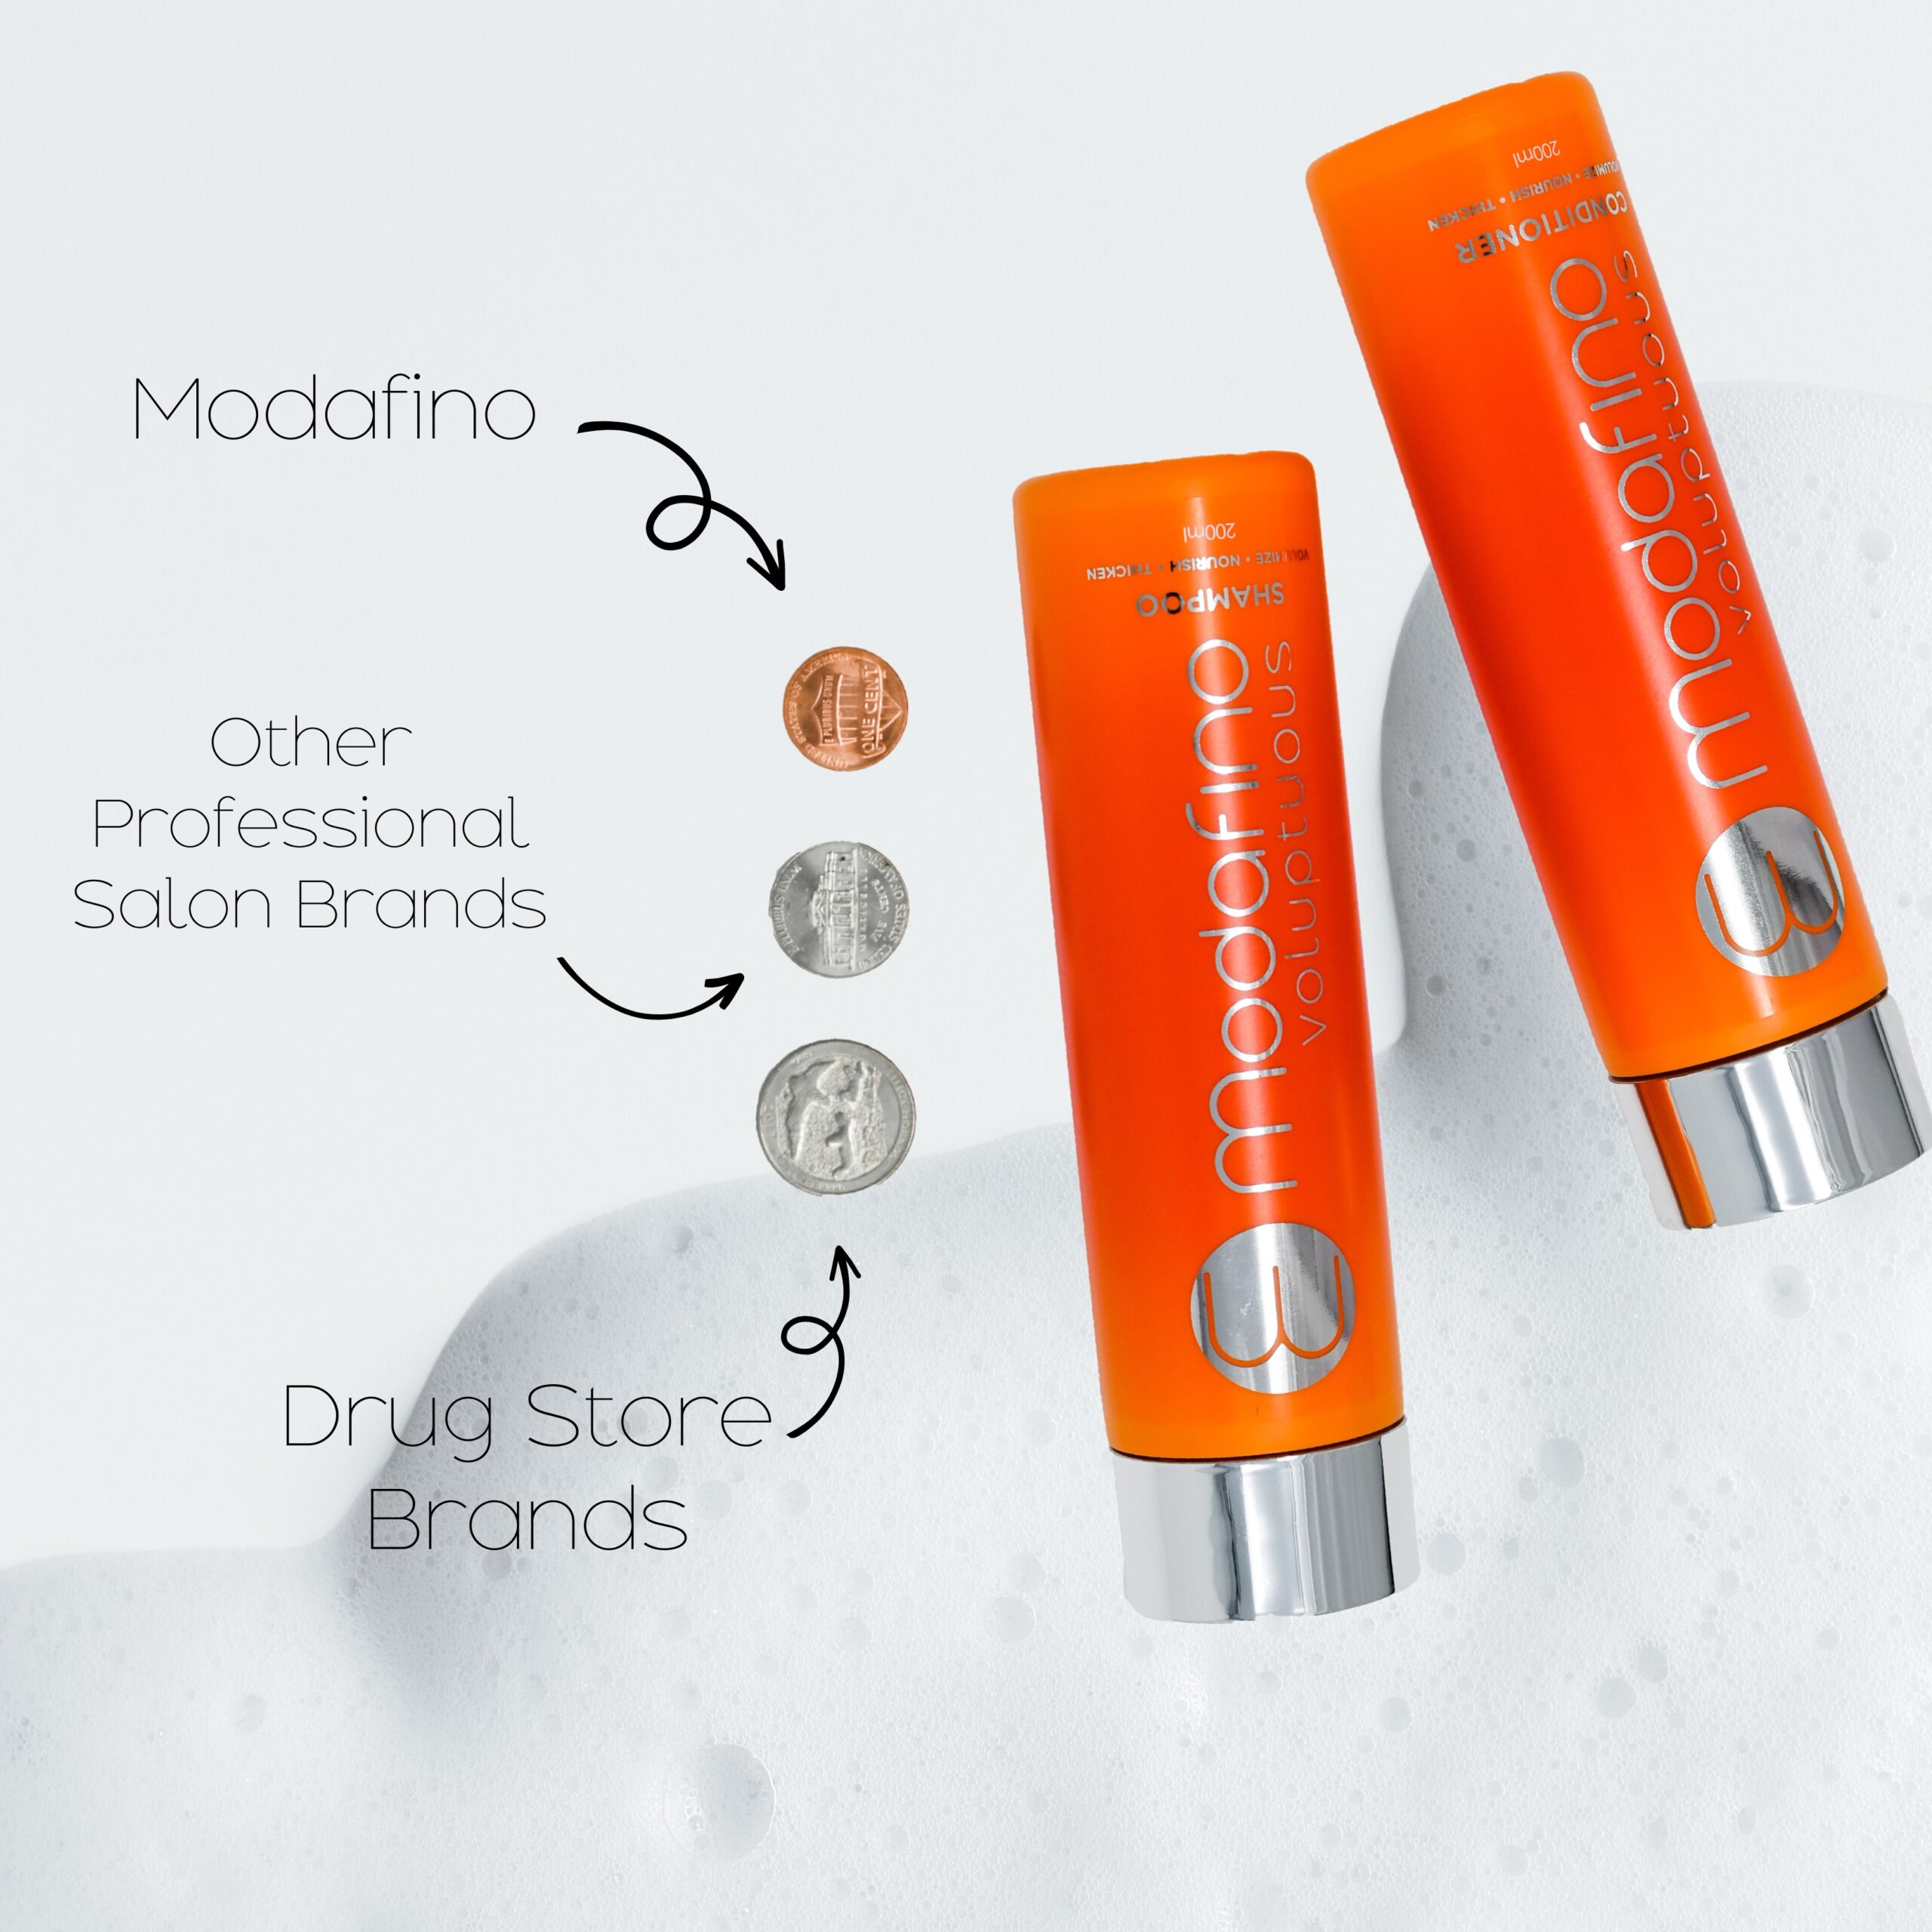 Experience the Ultimate in Hair Care Luxury with Modafino’s Ultra-Concentrated Formula